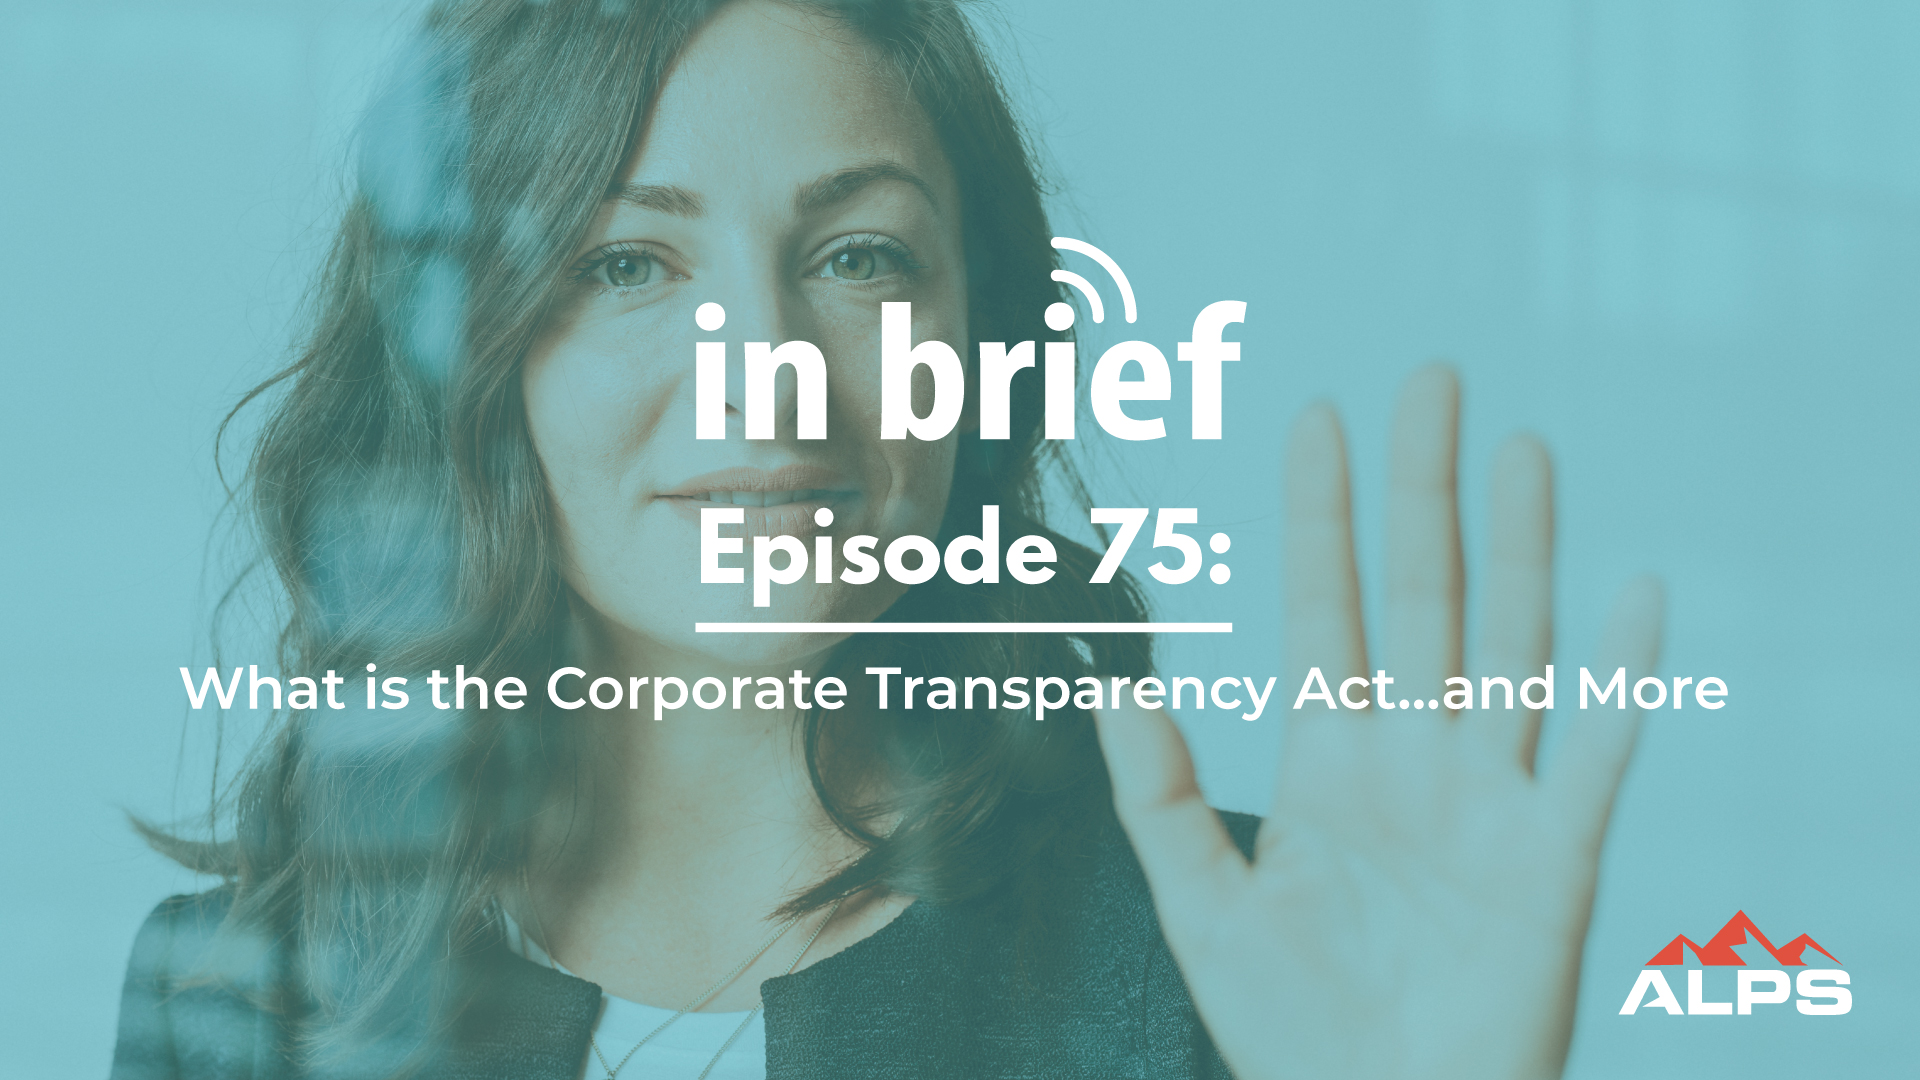 ALPS In Brief Podcast - Episode 75: What is the Corporate Transparency Act